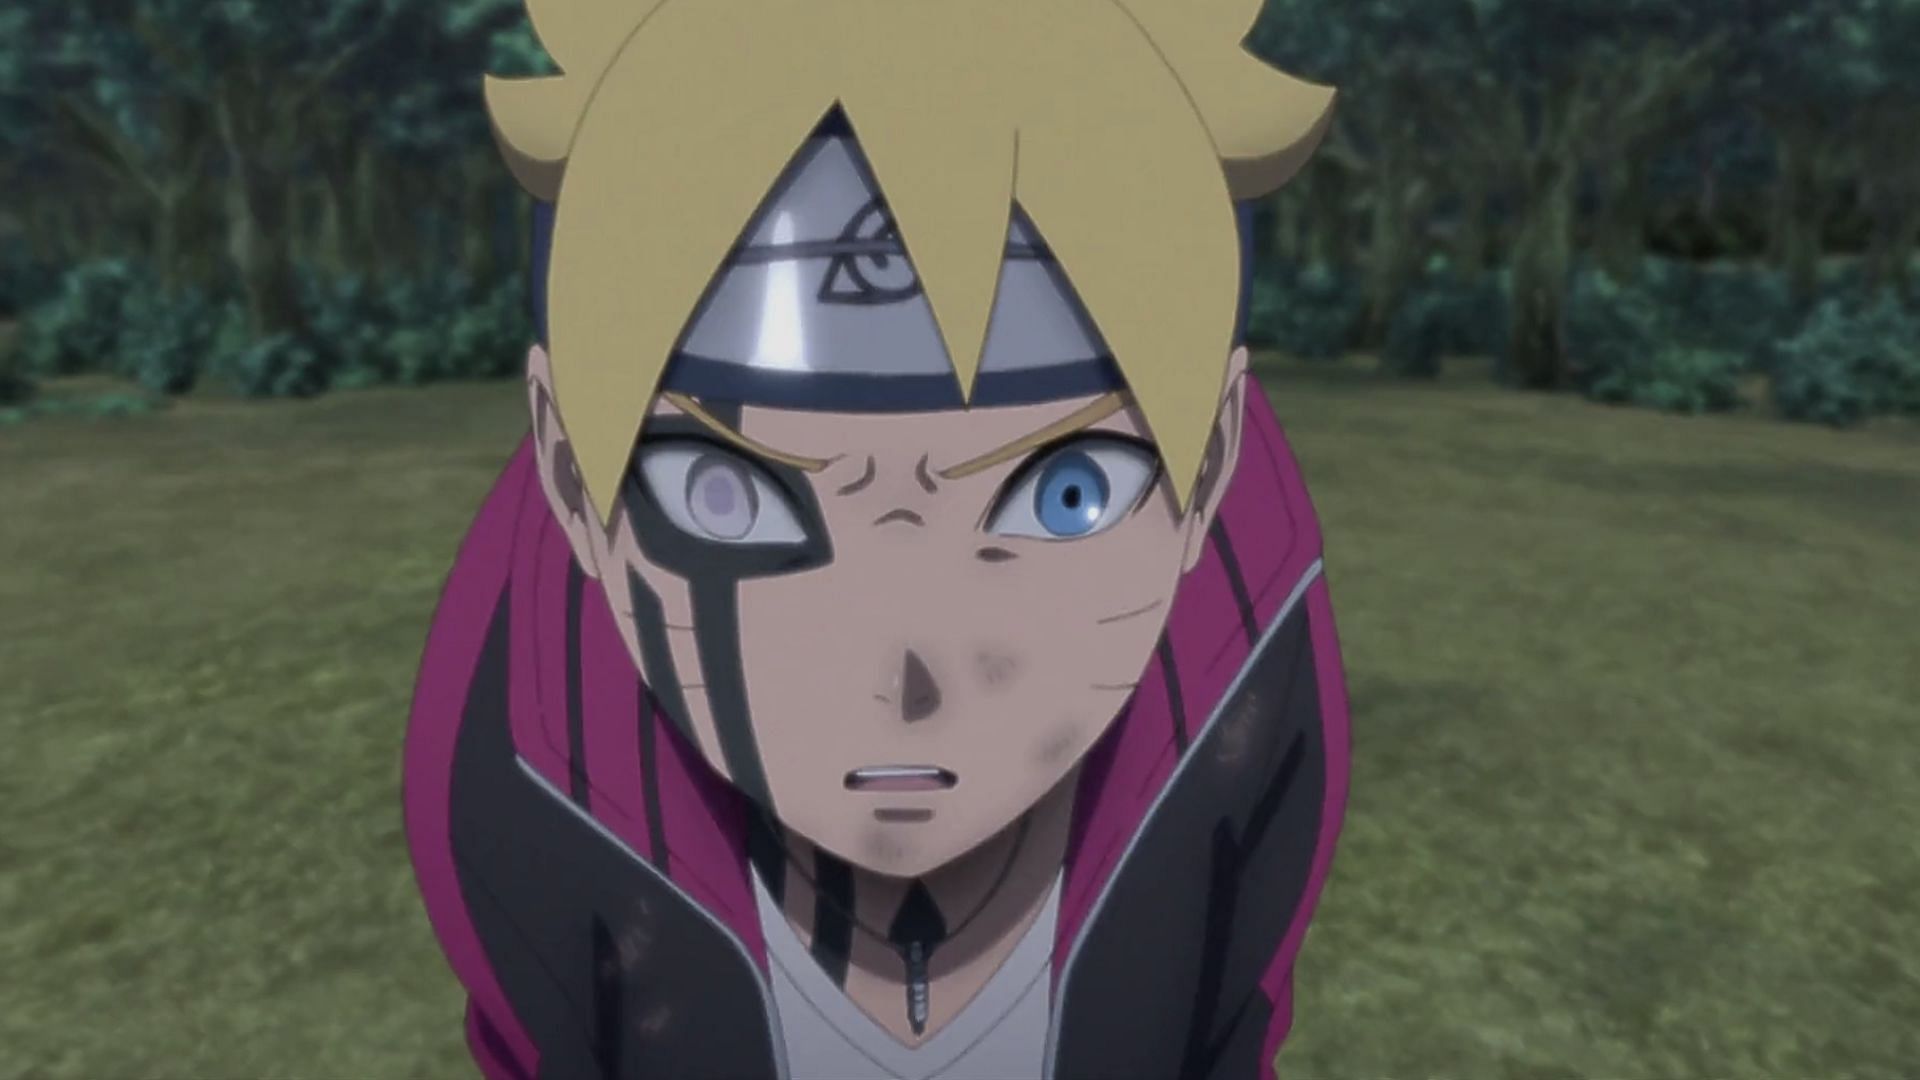 Boruto animes new Code design takes the internet by storm